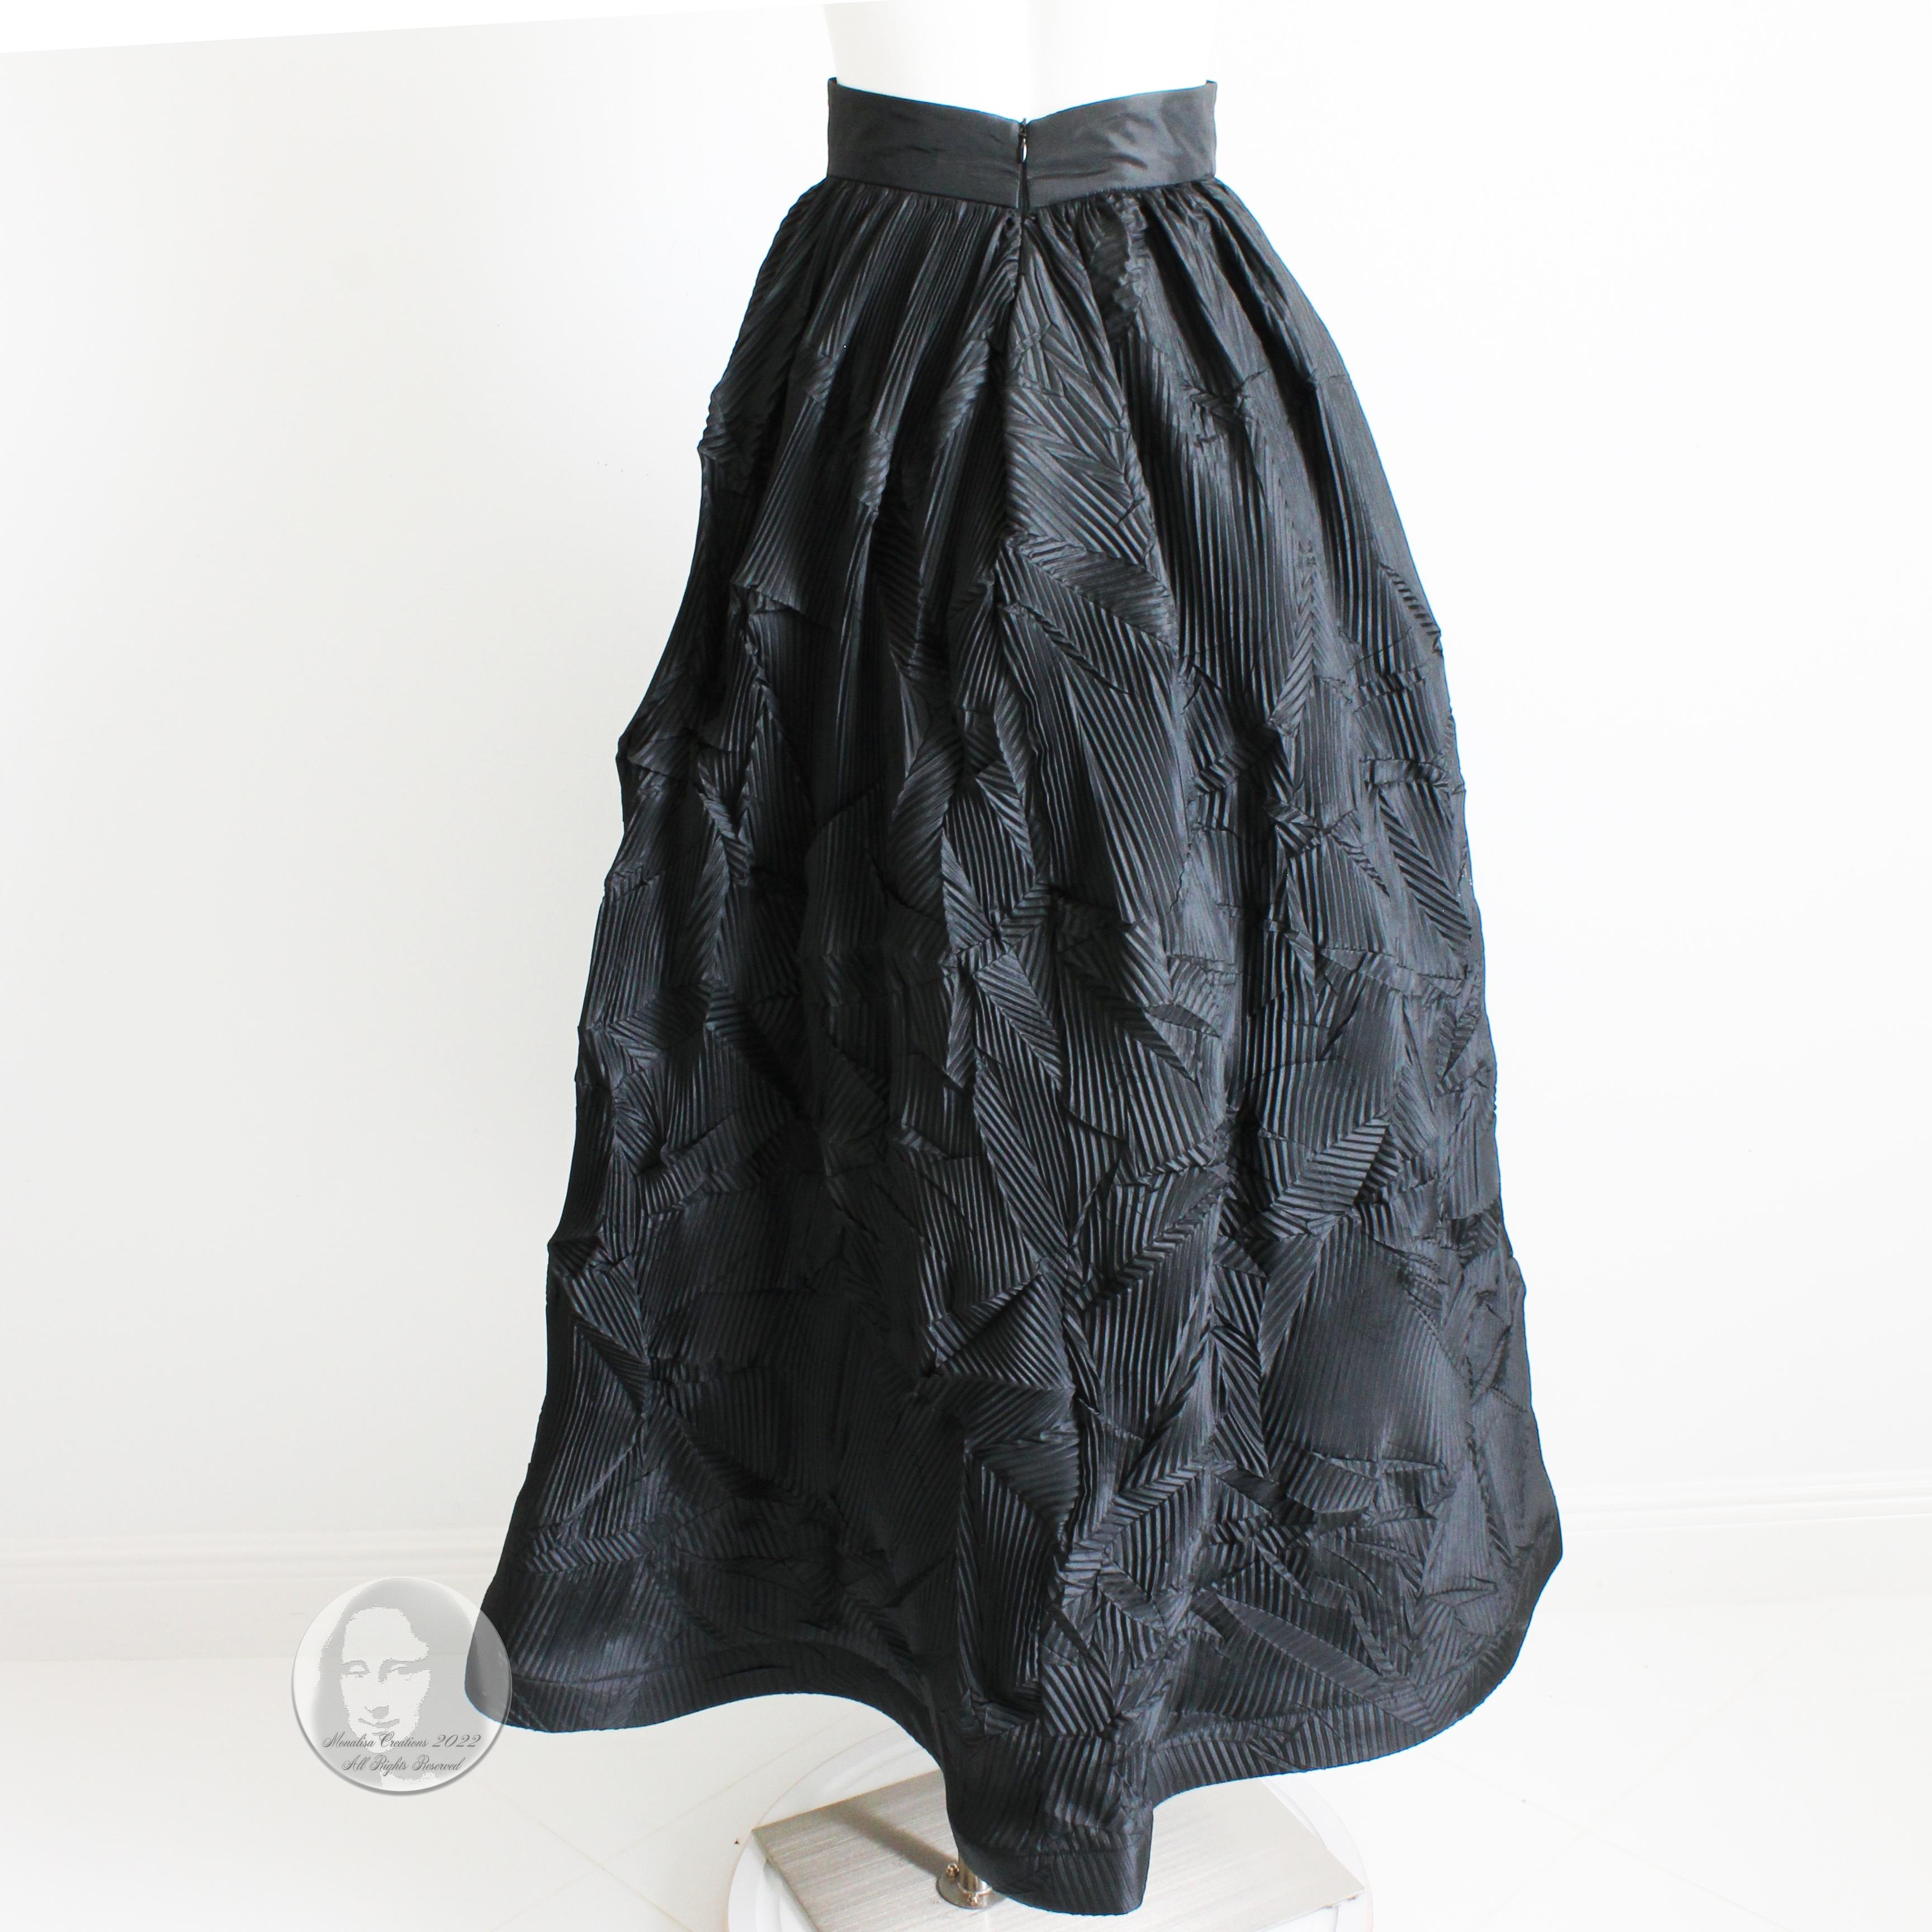 This stunning formal skirt was made by designer Sully Bonnelly, most likely in the 90s.  Made from what we believe is a rayon blend fabric (no content tags), this piece features TONS of pleats in various patterns throughout! Both the lining and the